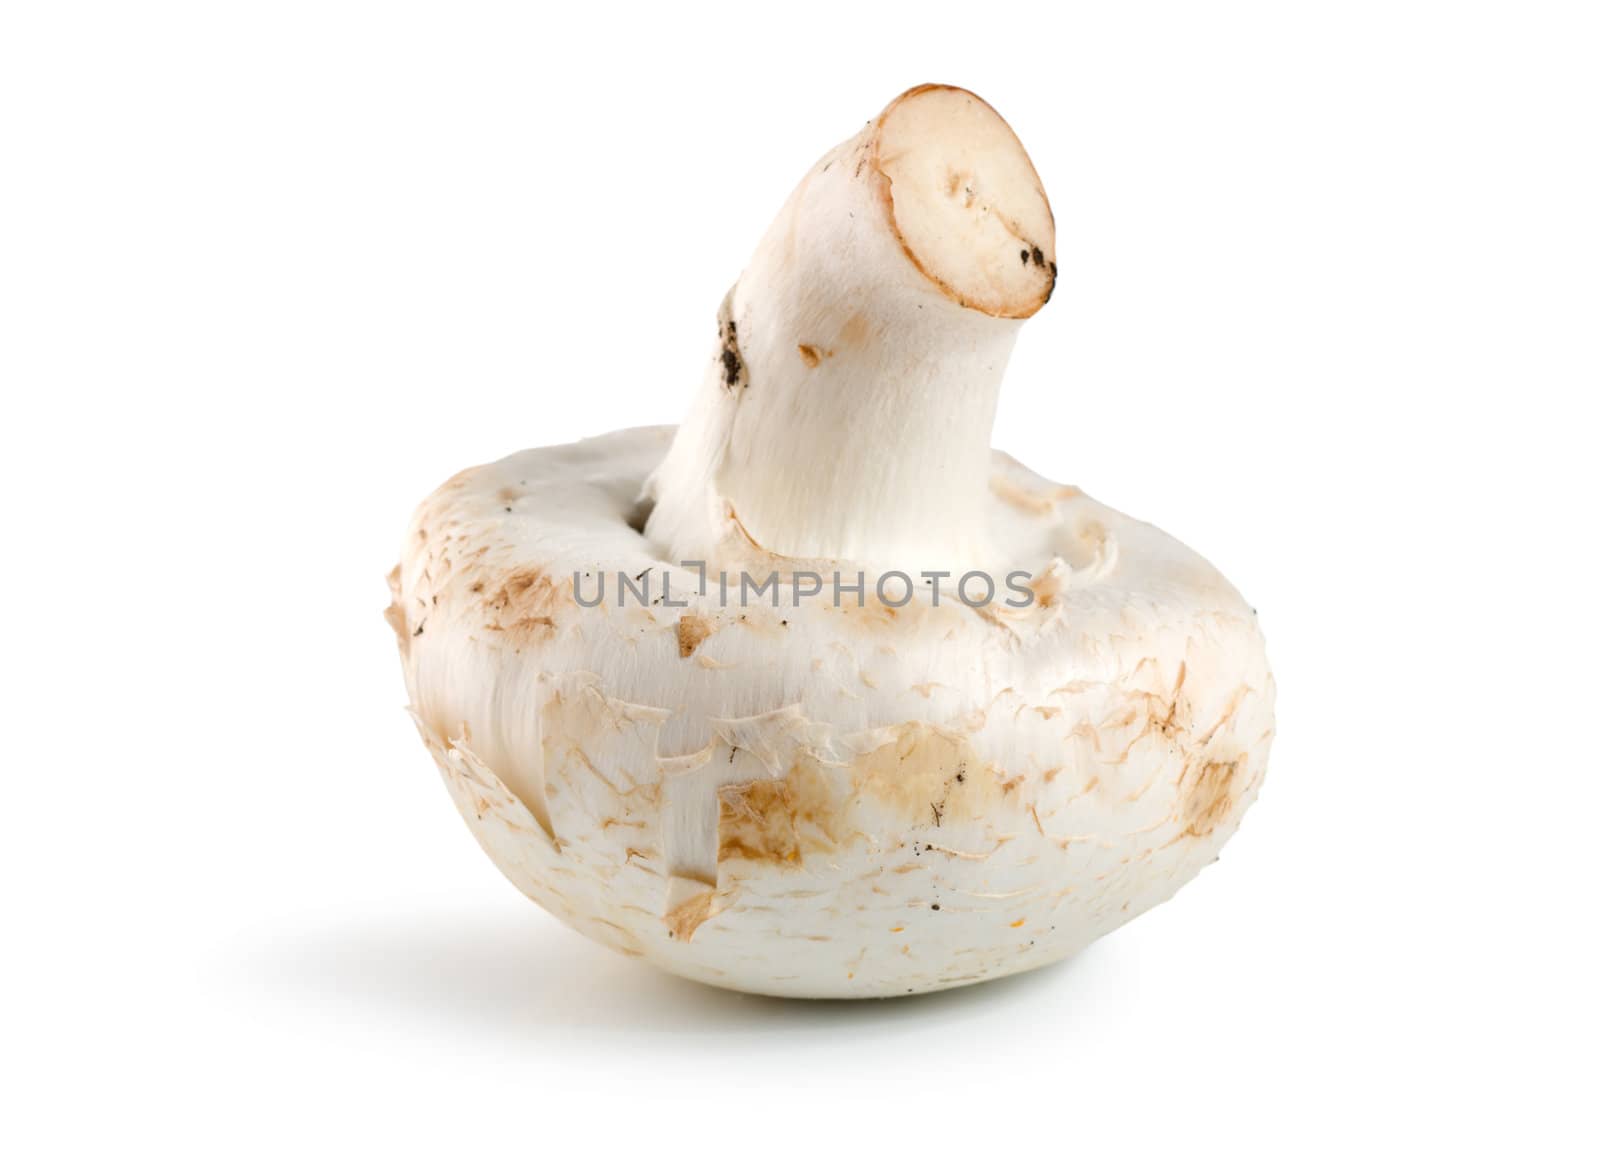 Button or champignon mushroom isolated on white